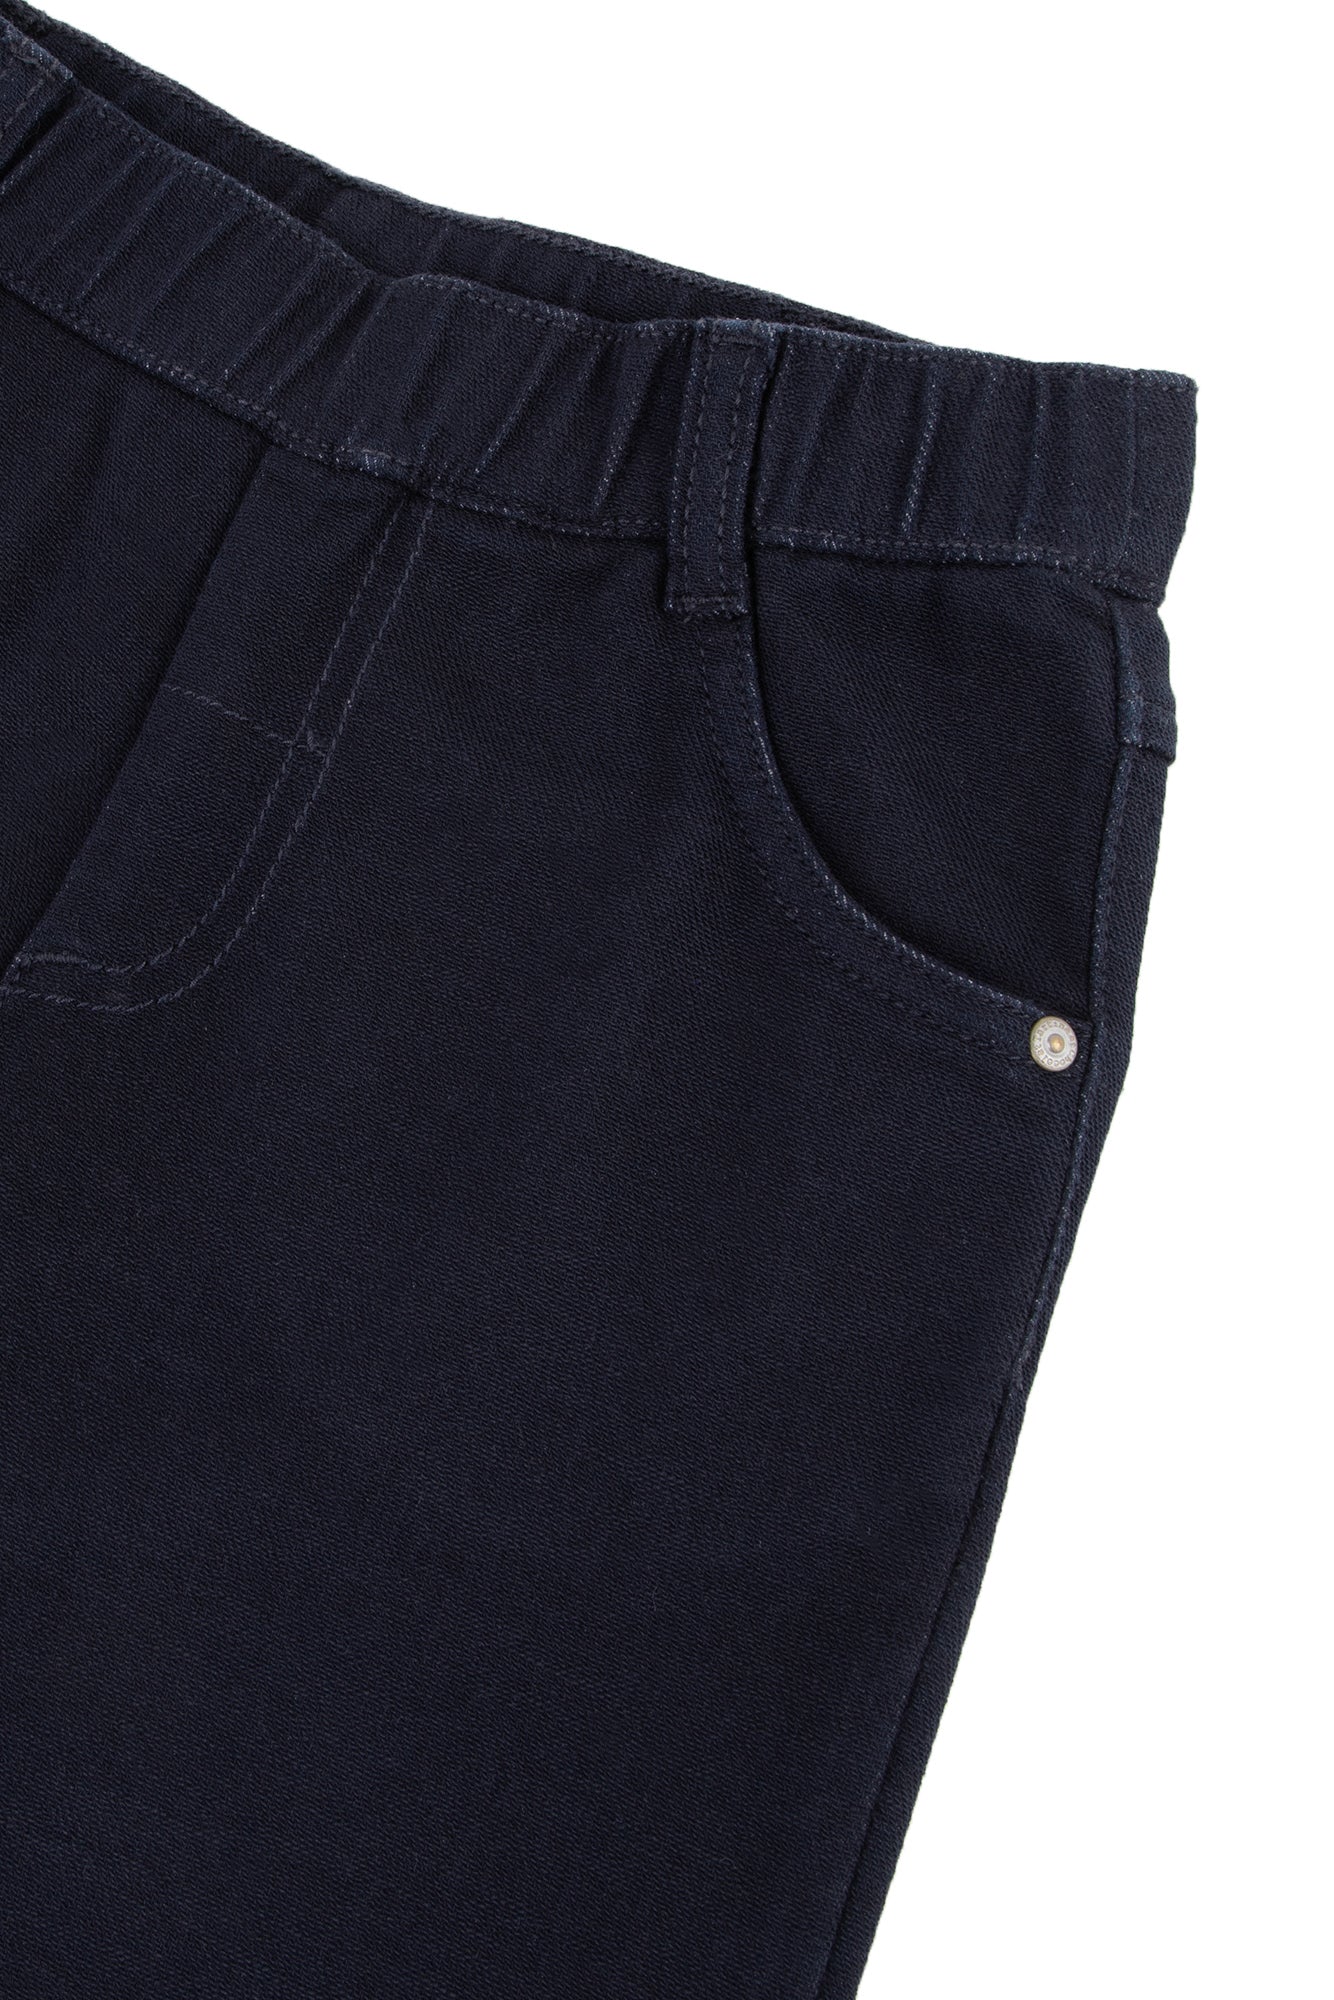 Trousers - Navy soft Marine / 5Y